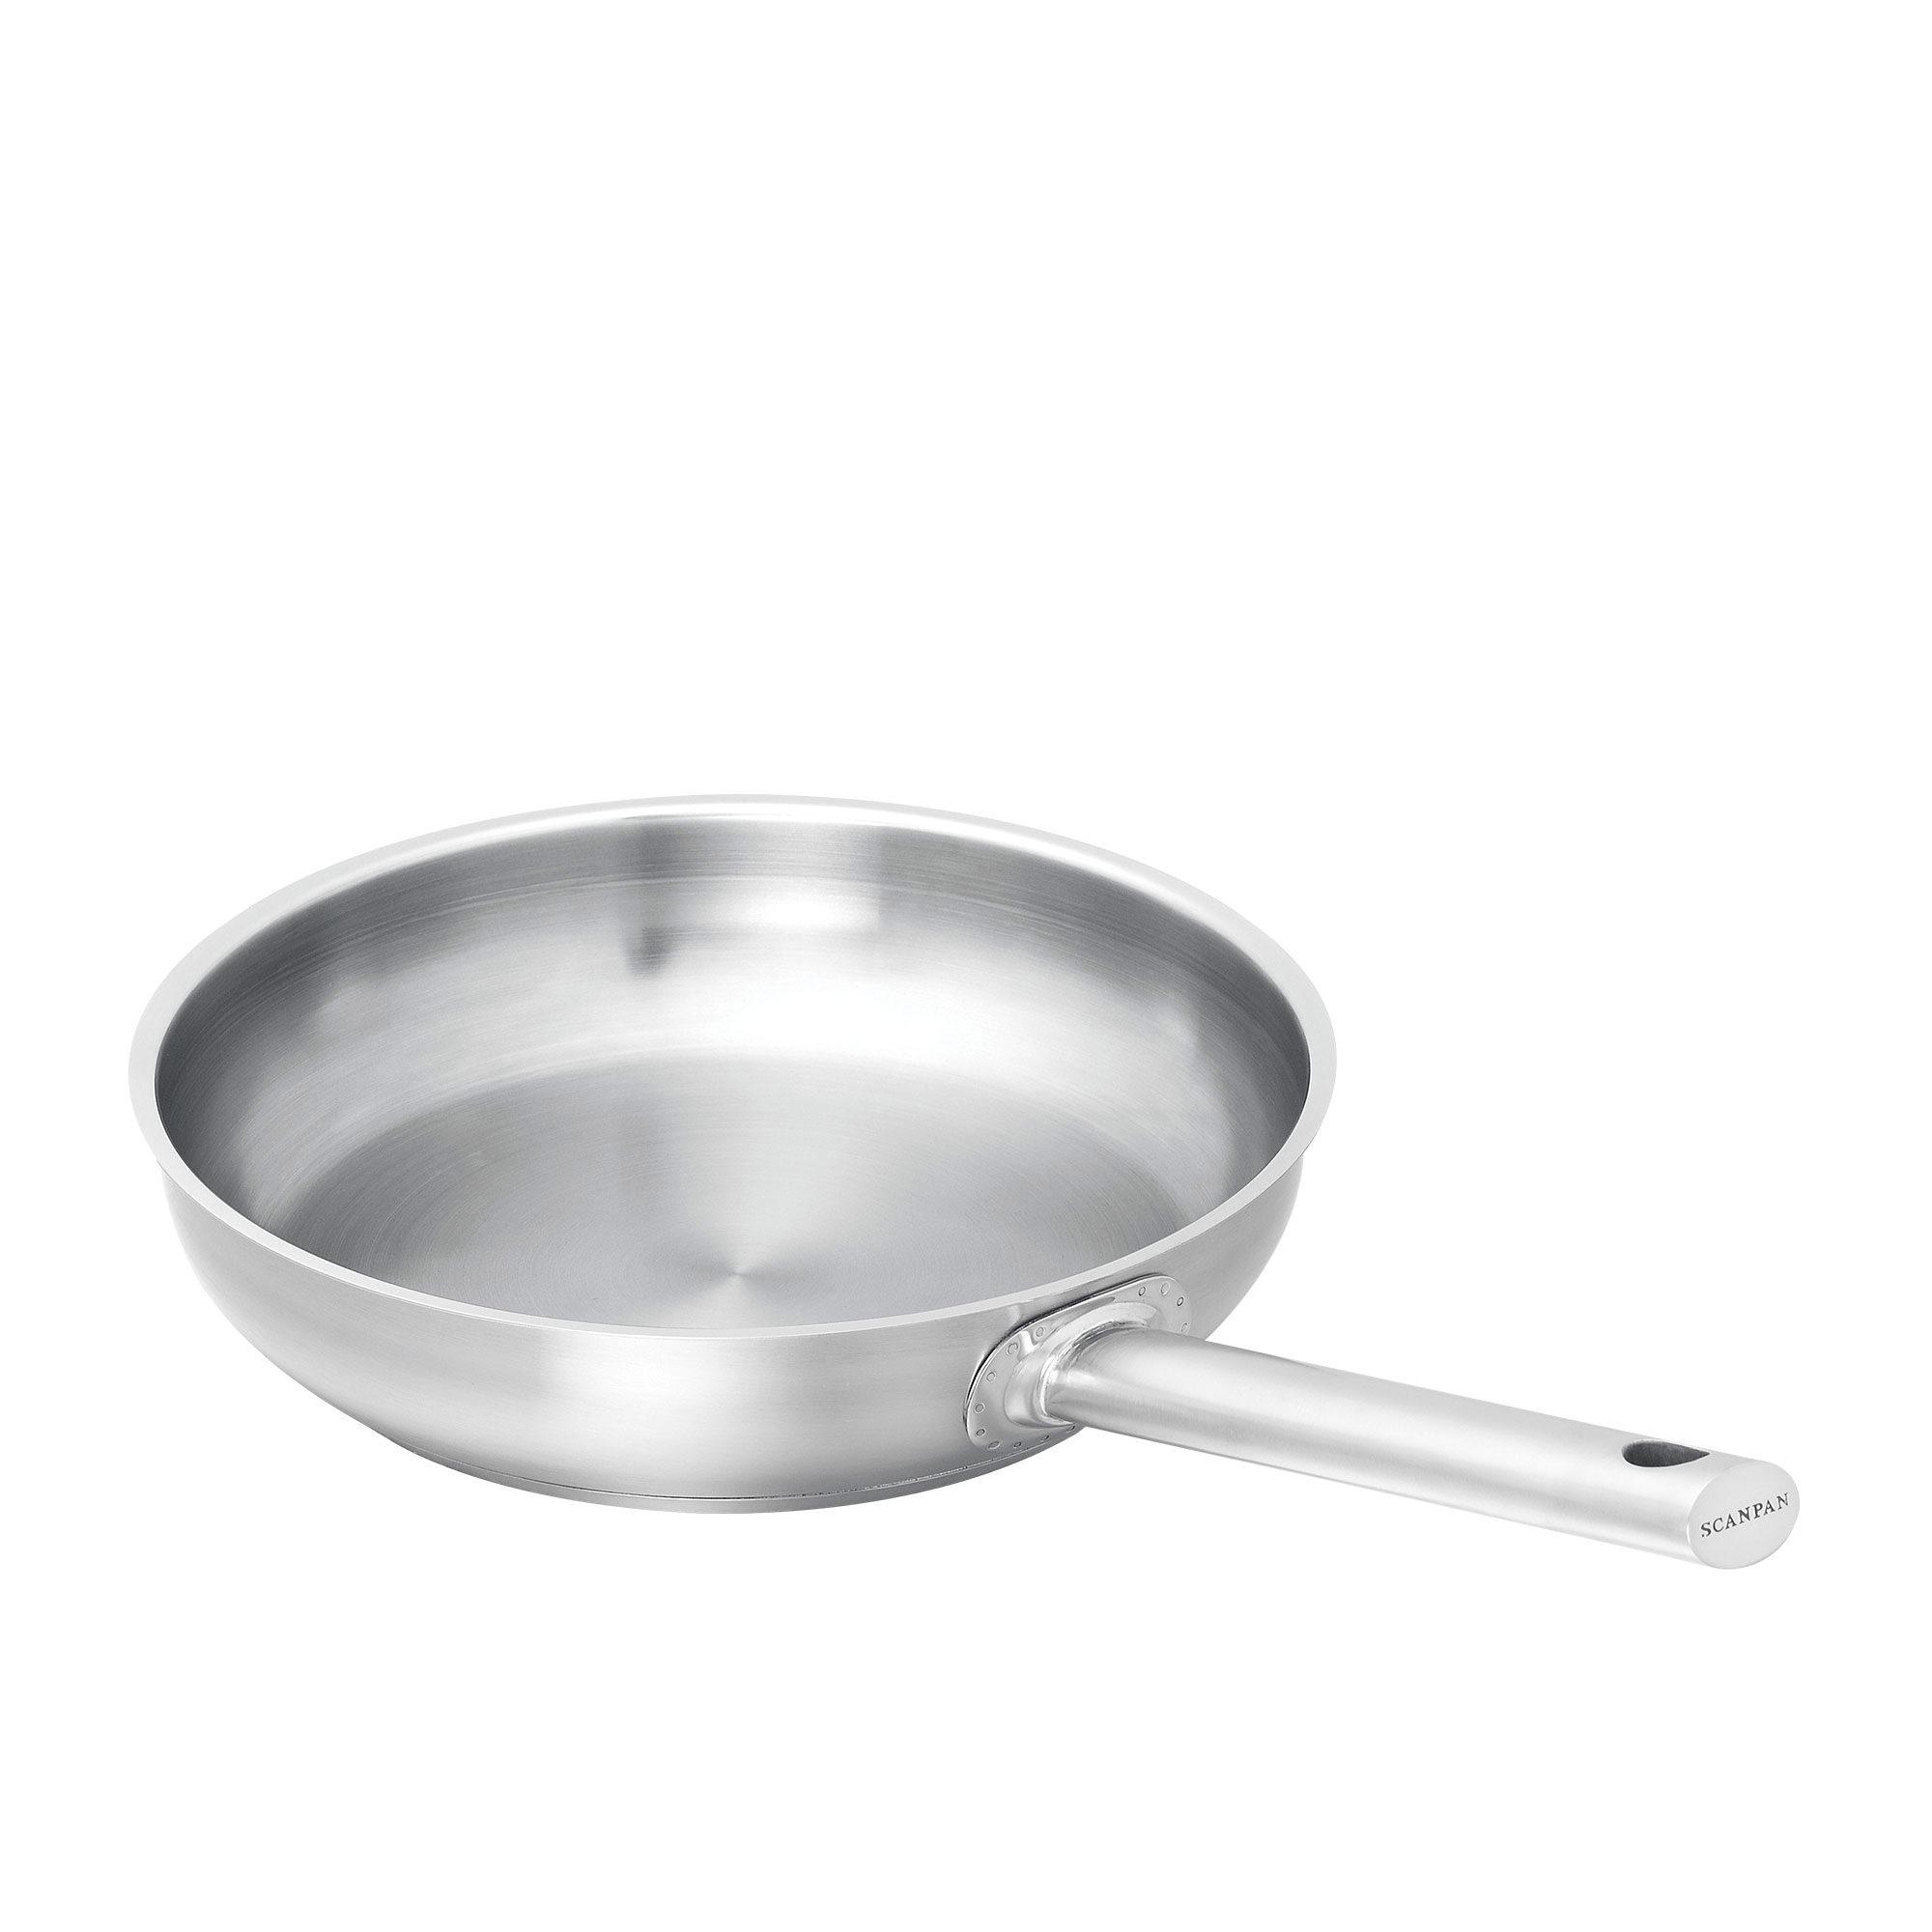 Scanpan Commercial Stainless Steel Frypan 30cm Image 1